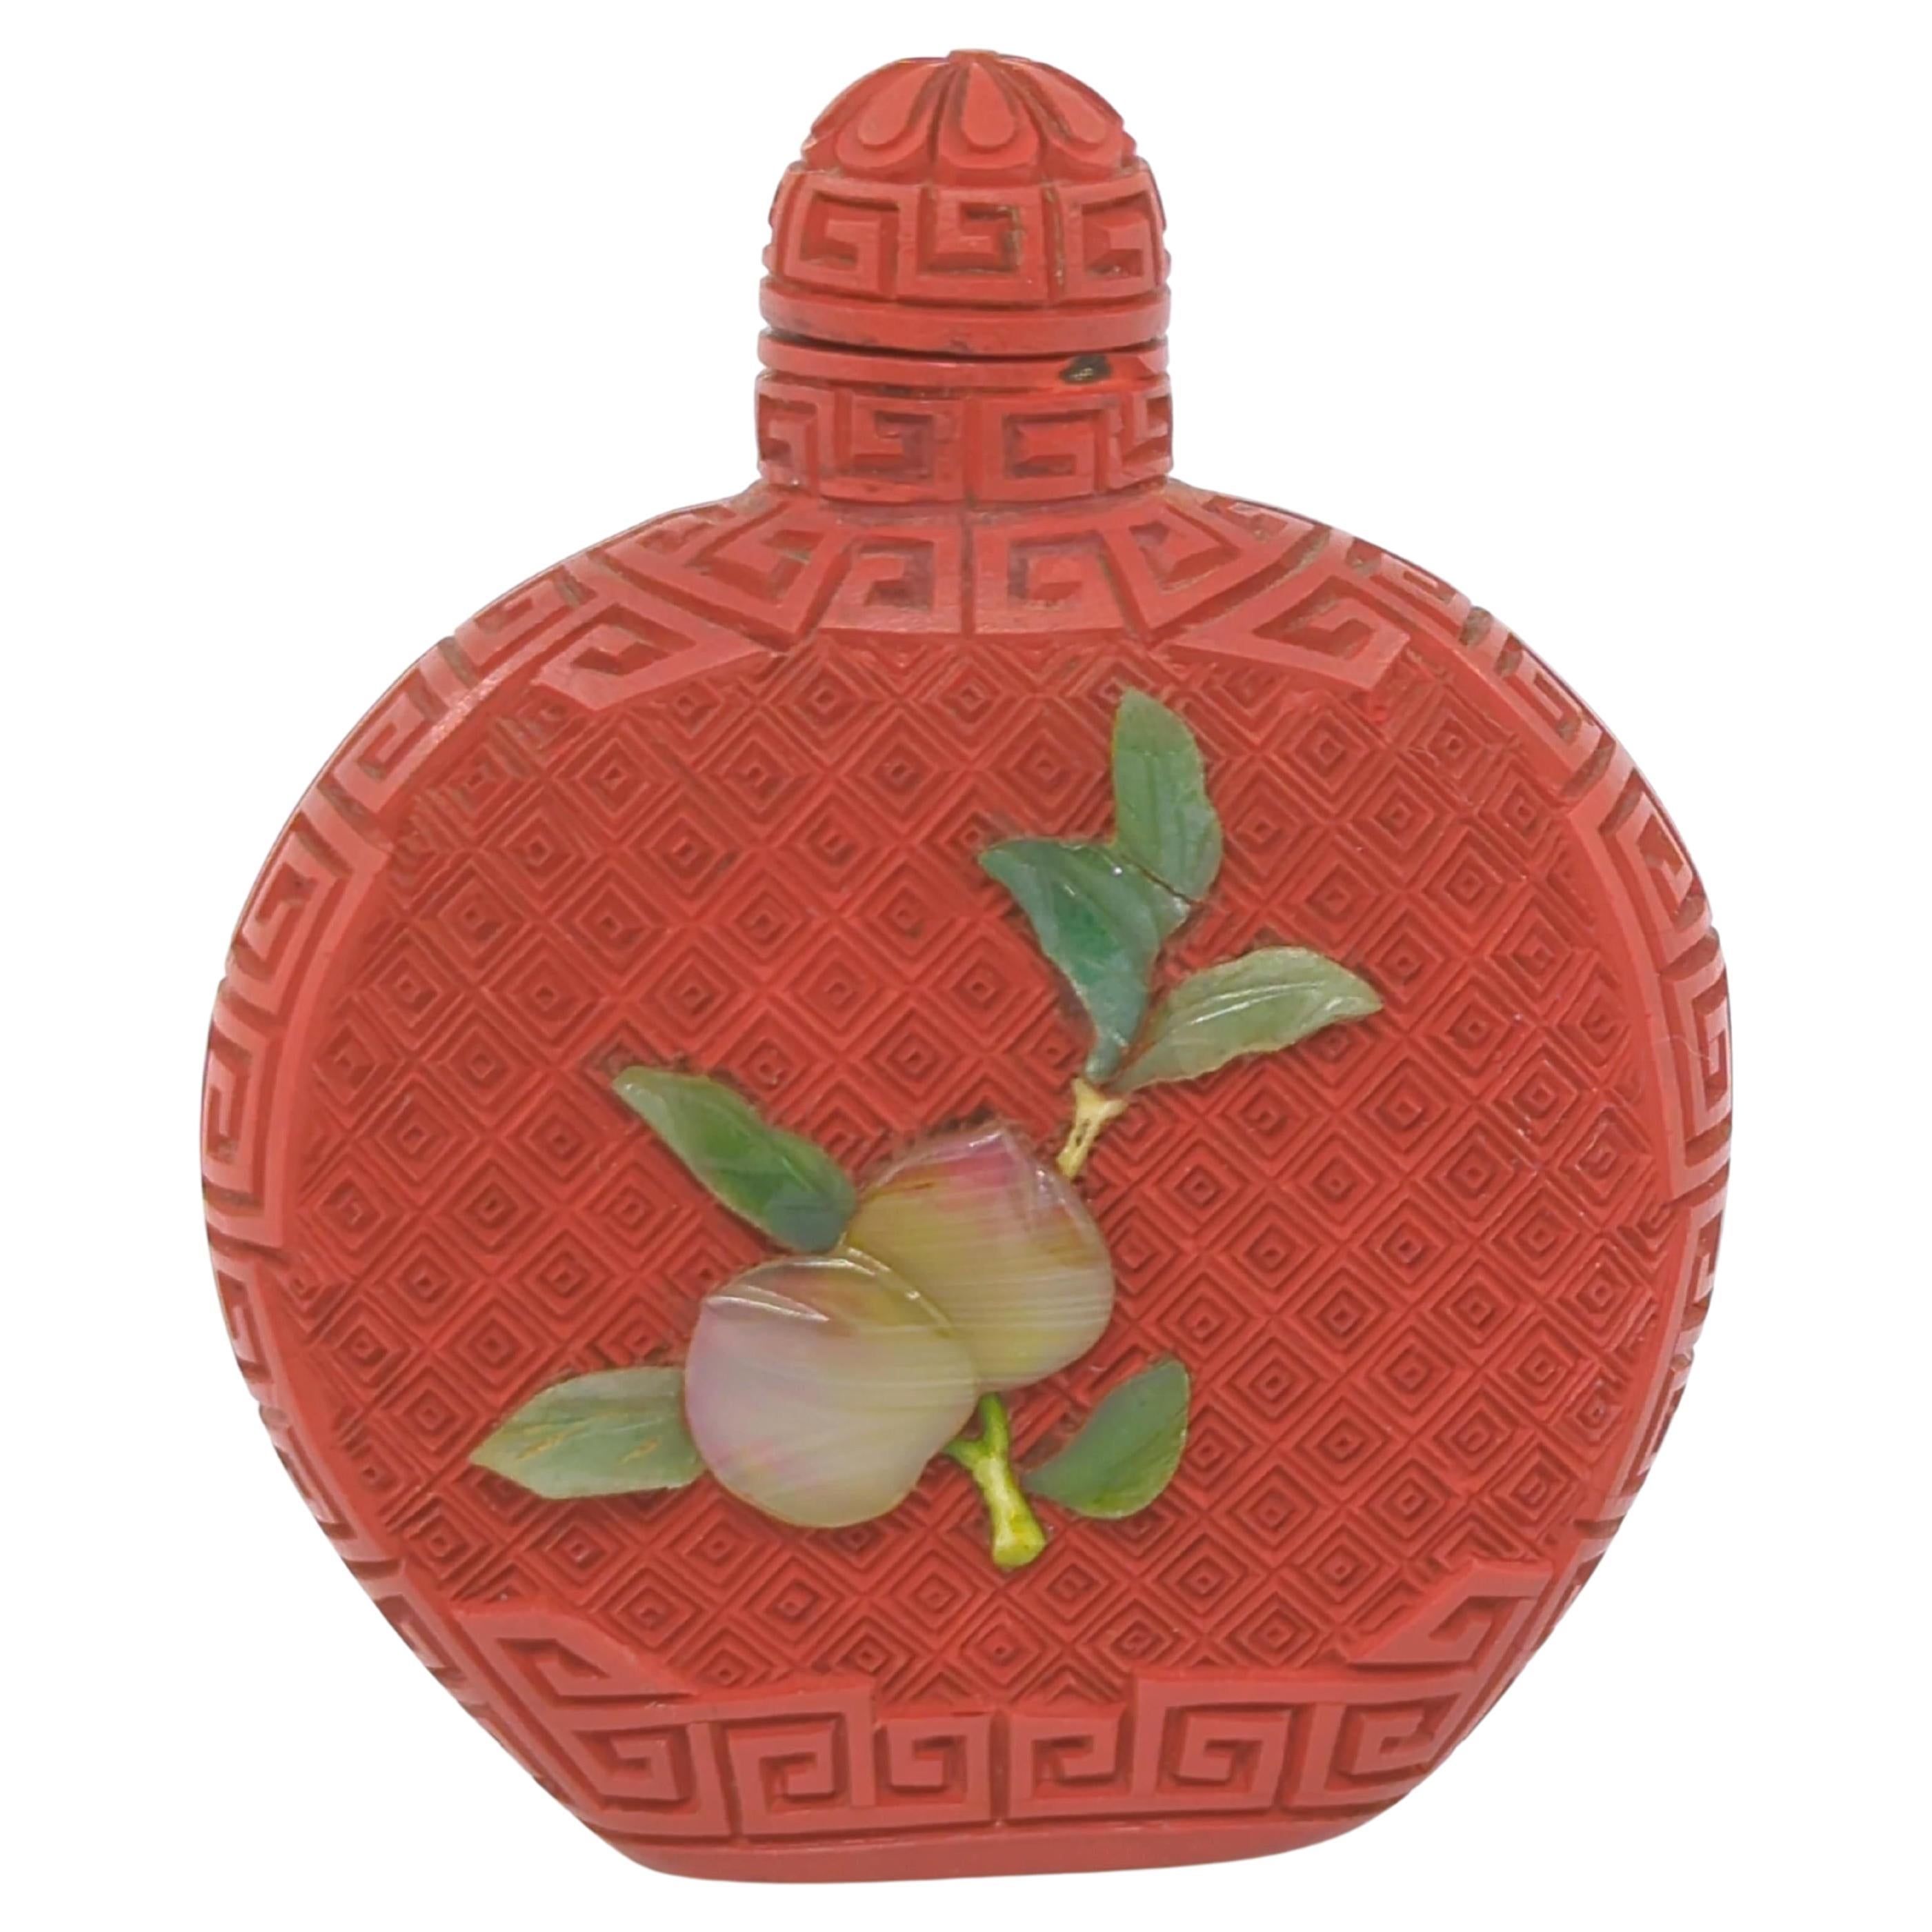 This cinnabar snuff bottle from the Republic of China period is a masterful blend of intricate craftsmanship and symbolic artistry. The bottle, in a flattened globular form, serves as a canvas for a meticulously carved persimmon on the vine with